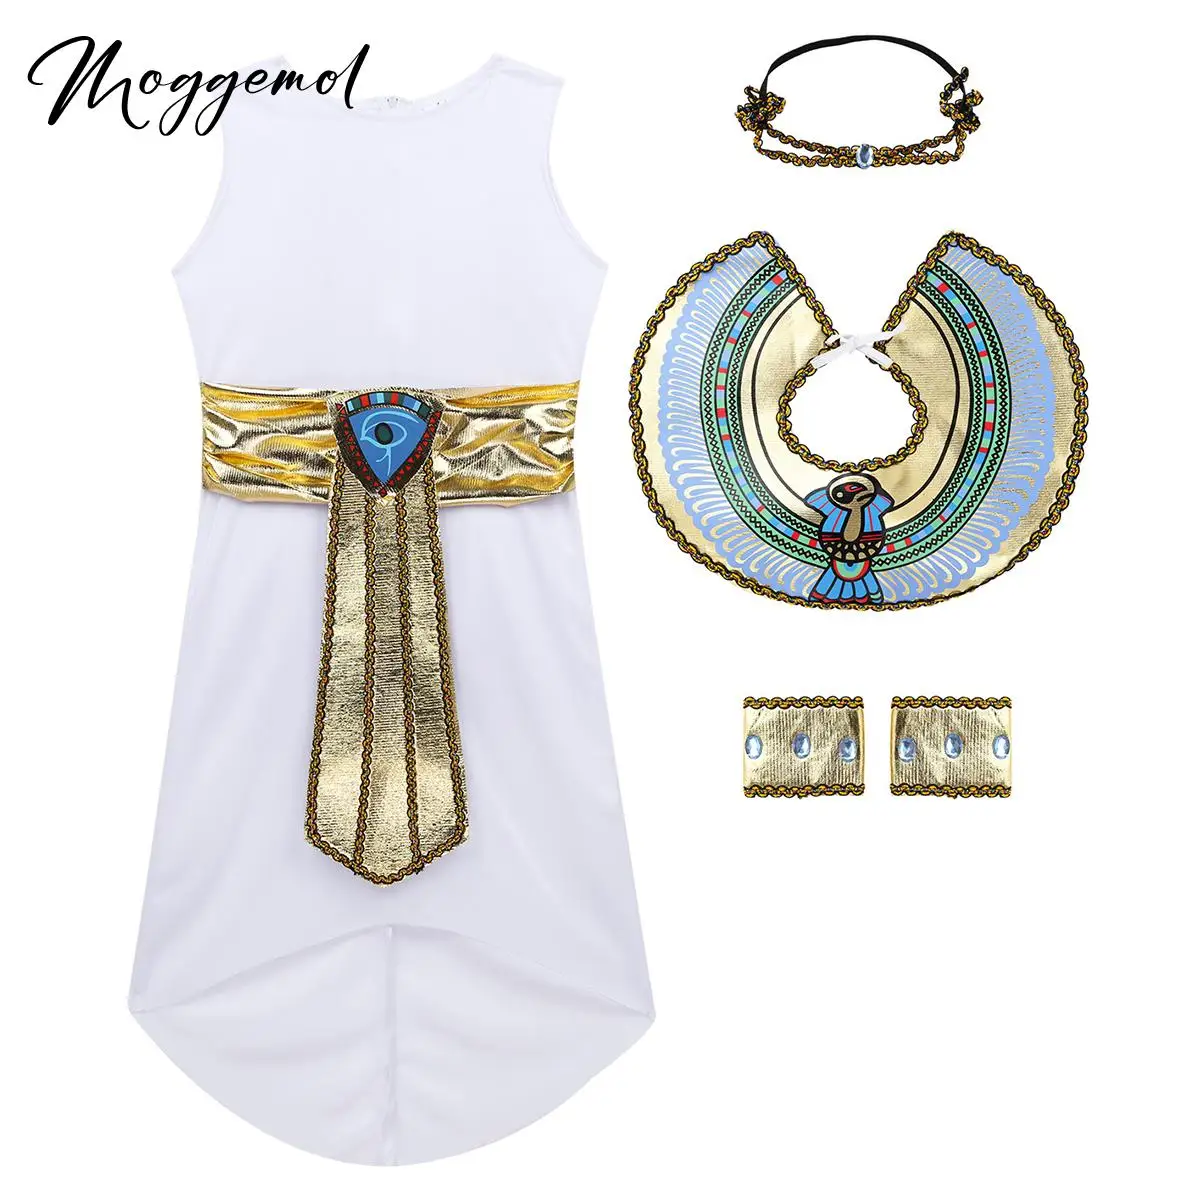 

Kids Boy Girls Ancient Egypt Egyptian Pharaoh Cleopatra Dress Costume for Halloween Party Cosplay Role Play Collar Armbands Set